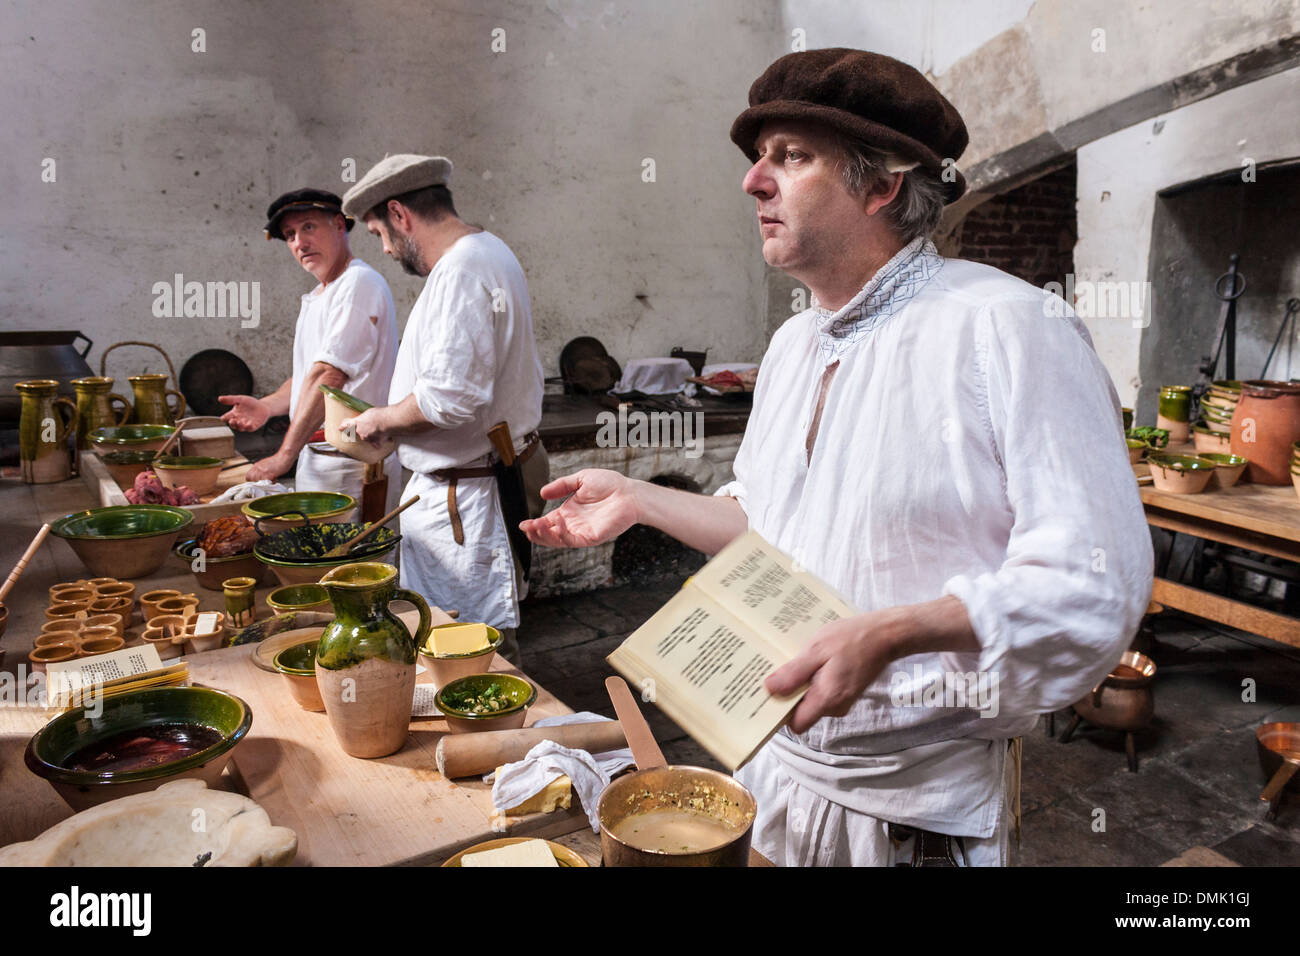 Cooks prepare traditional dishes from historical recipes in the Tudor kitchens at Hampton Court Palace, London, England, GB, UK. Stock Photo